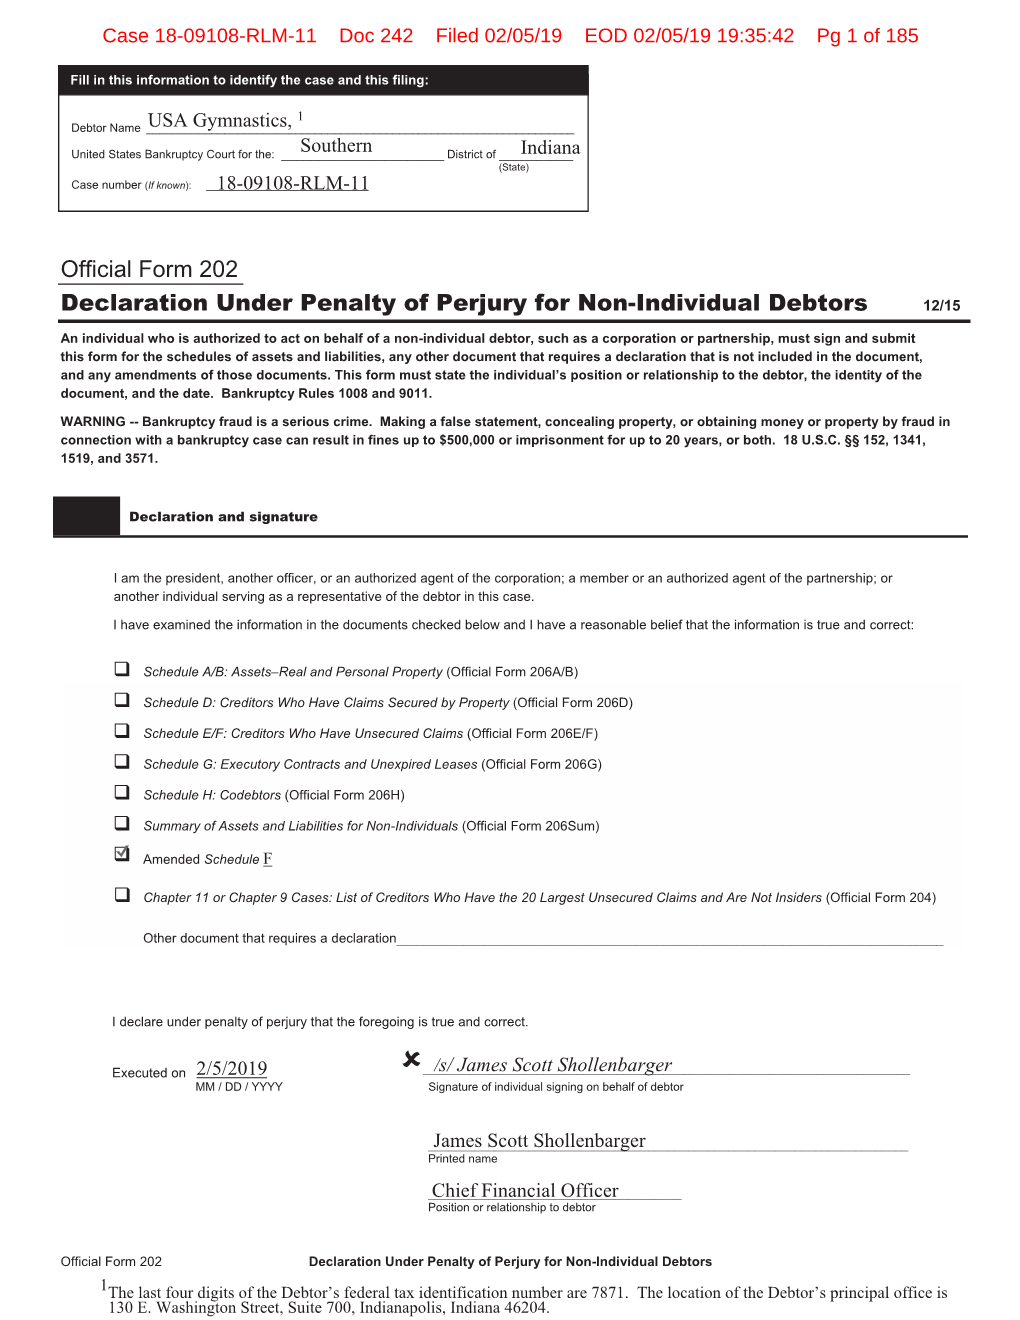 Official Form 202 Declaration Under Penalty of Perjury for Non-Individual Debtors 12/15